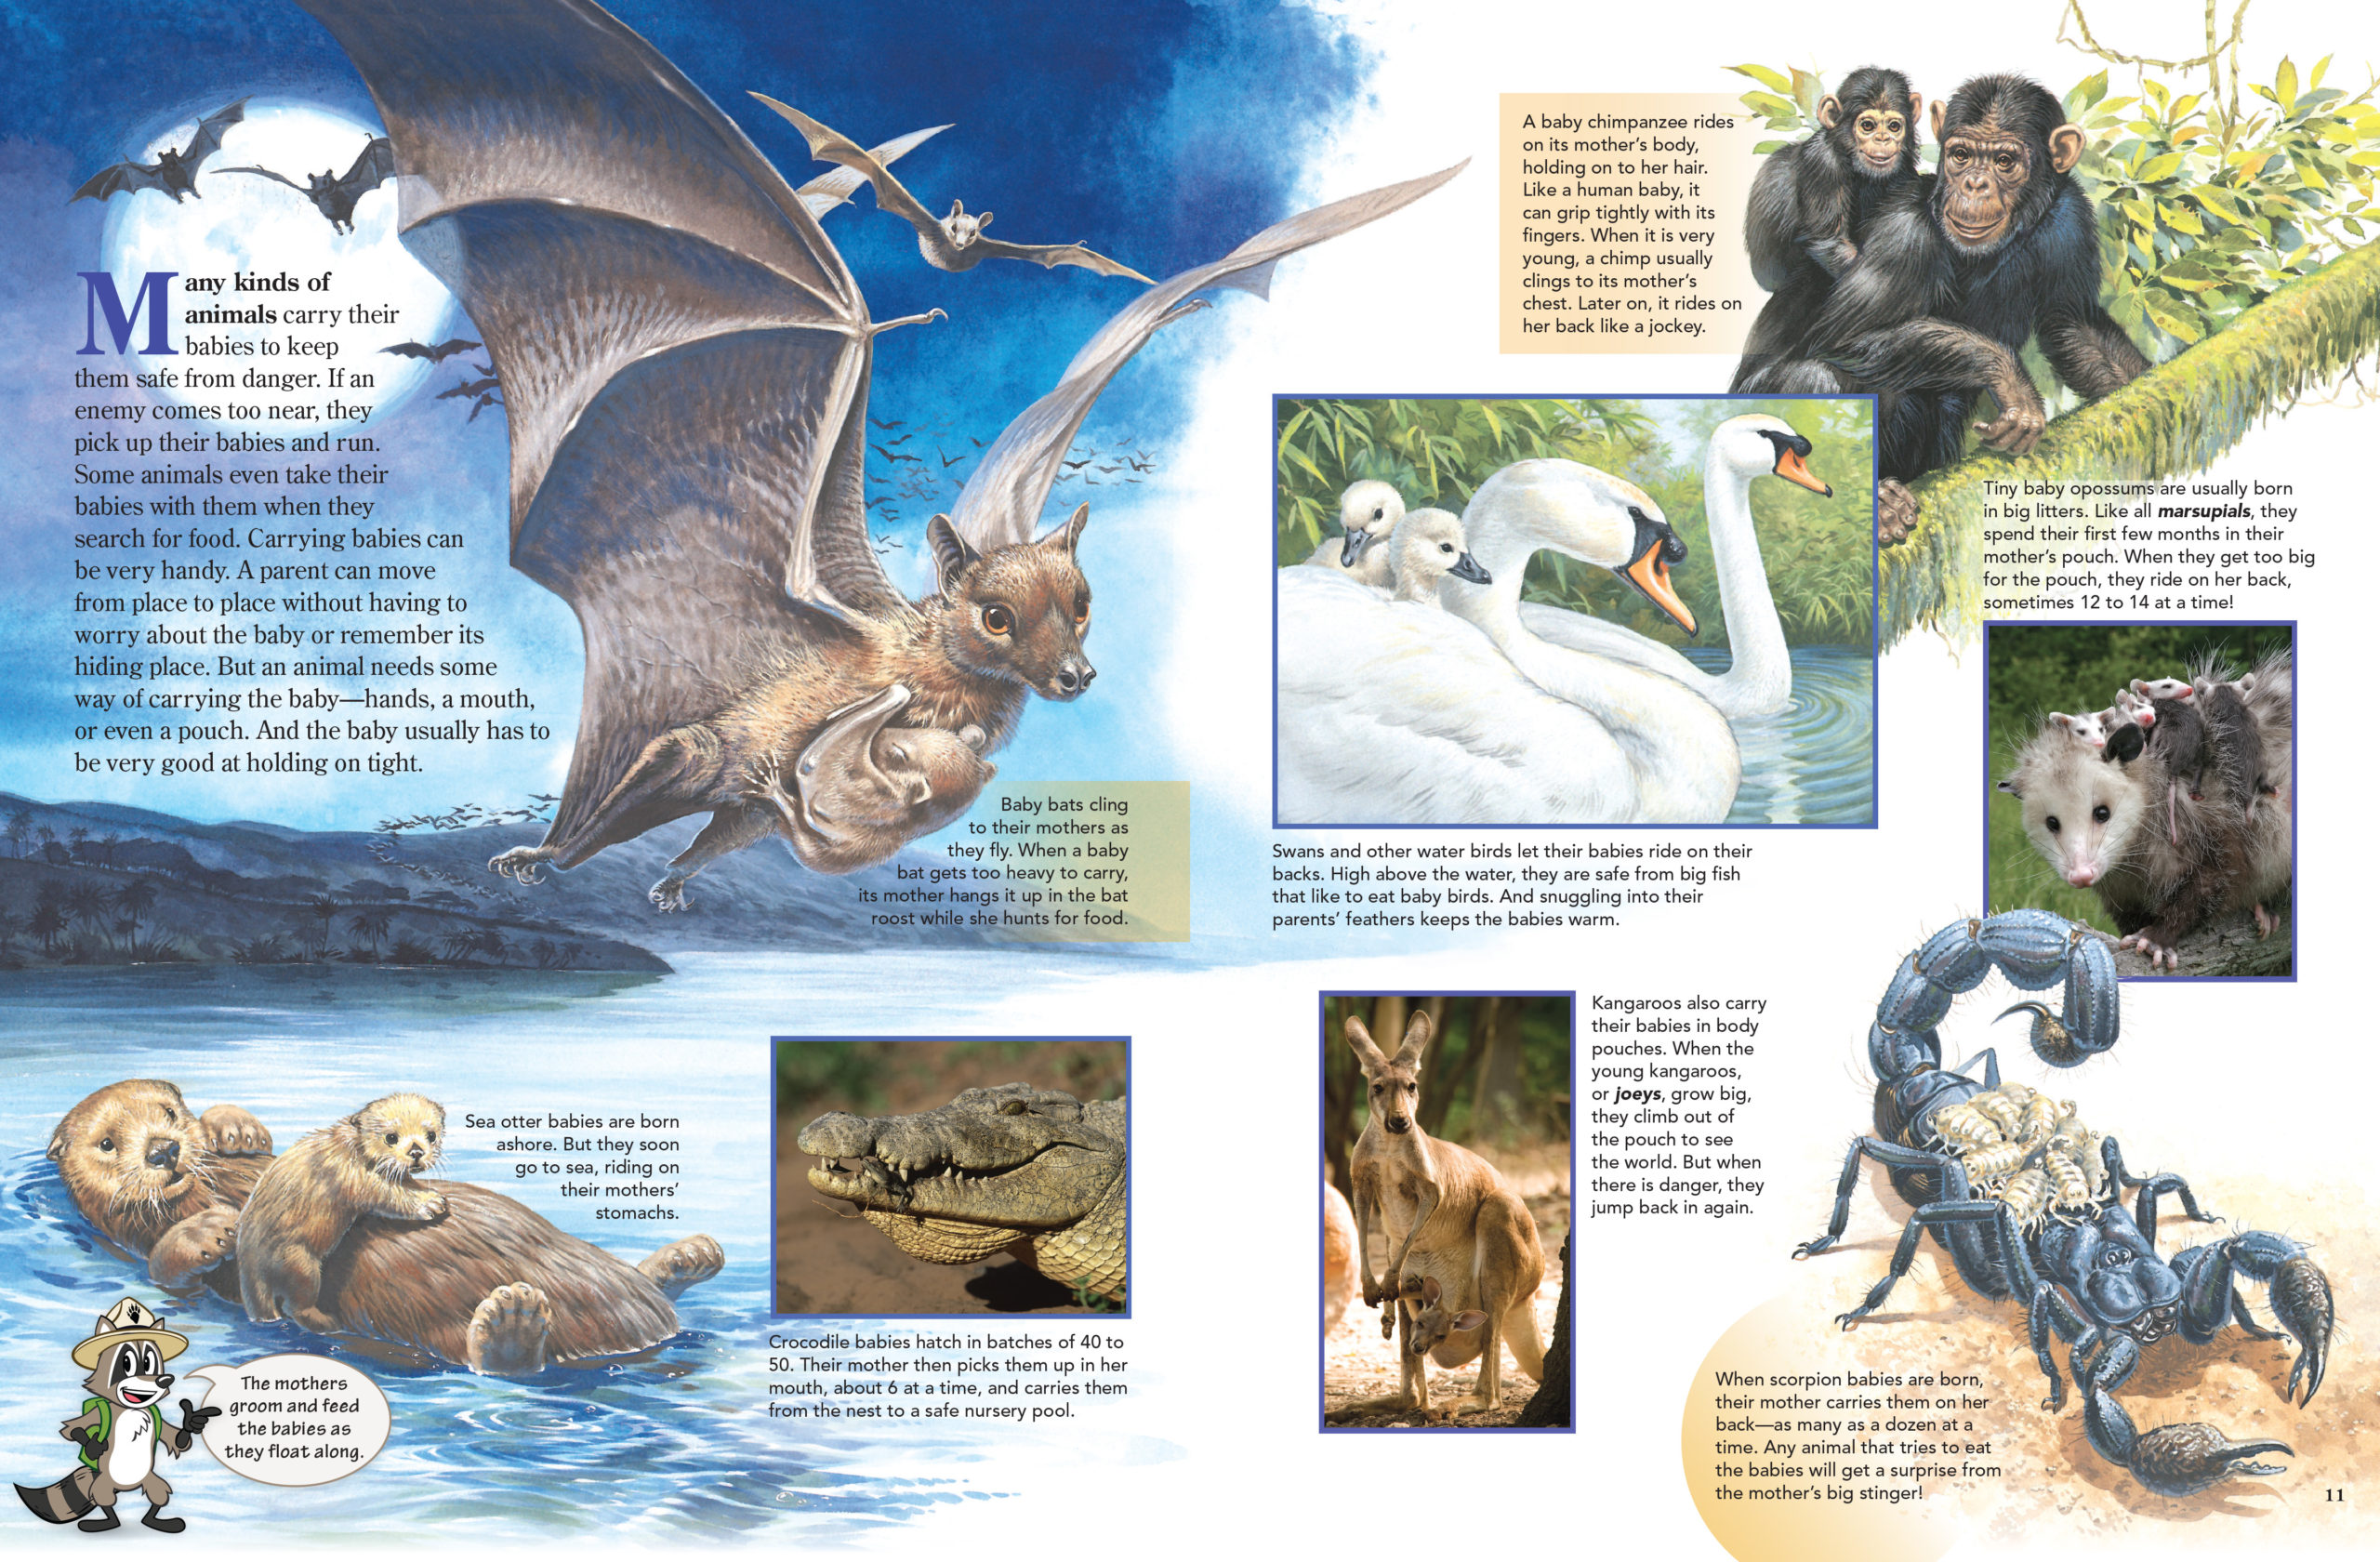 Pages depicting the way mothers transport their babies: a bat flying, chimp climbing, swans swimming, kangaroo and joey, otter floating, crocodile with babies in mouth, possom and scorpion with young on their backs.